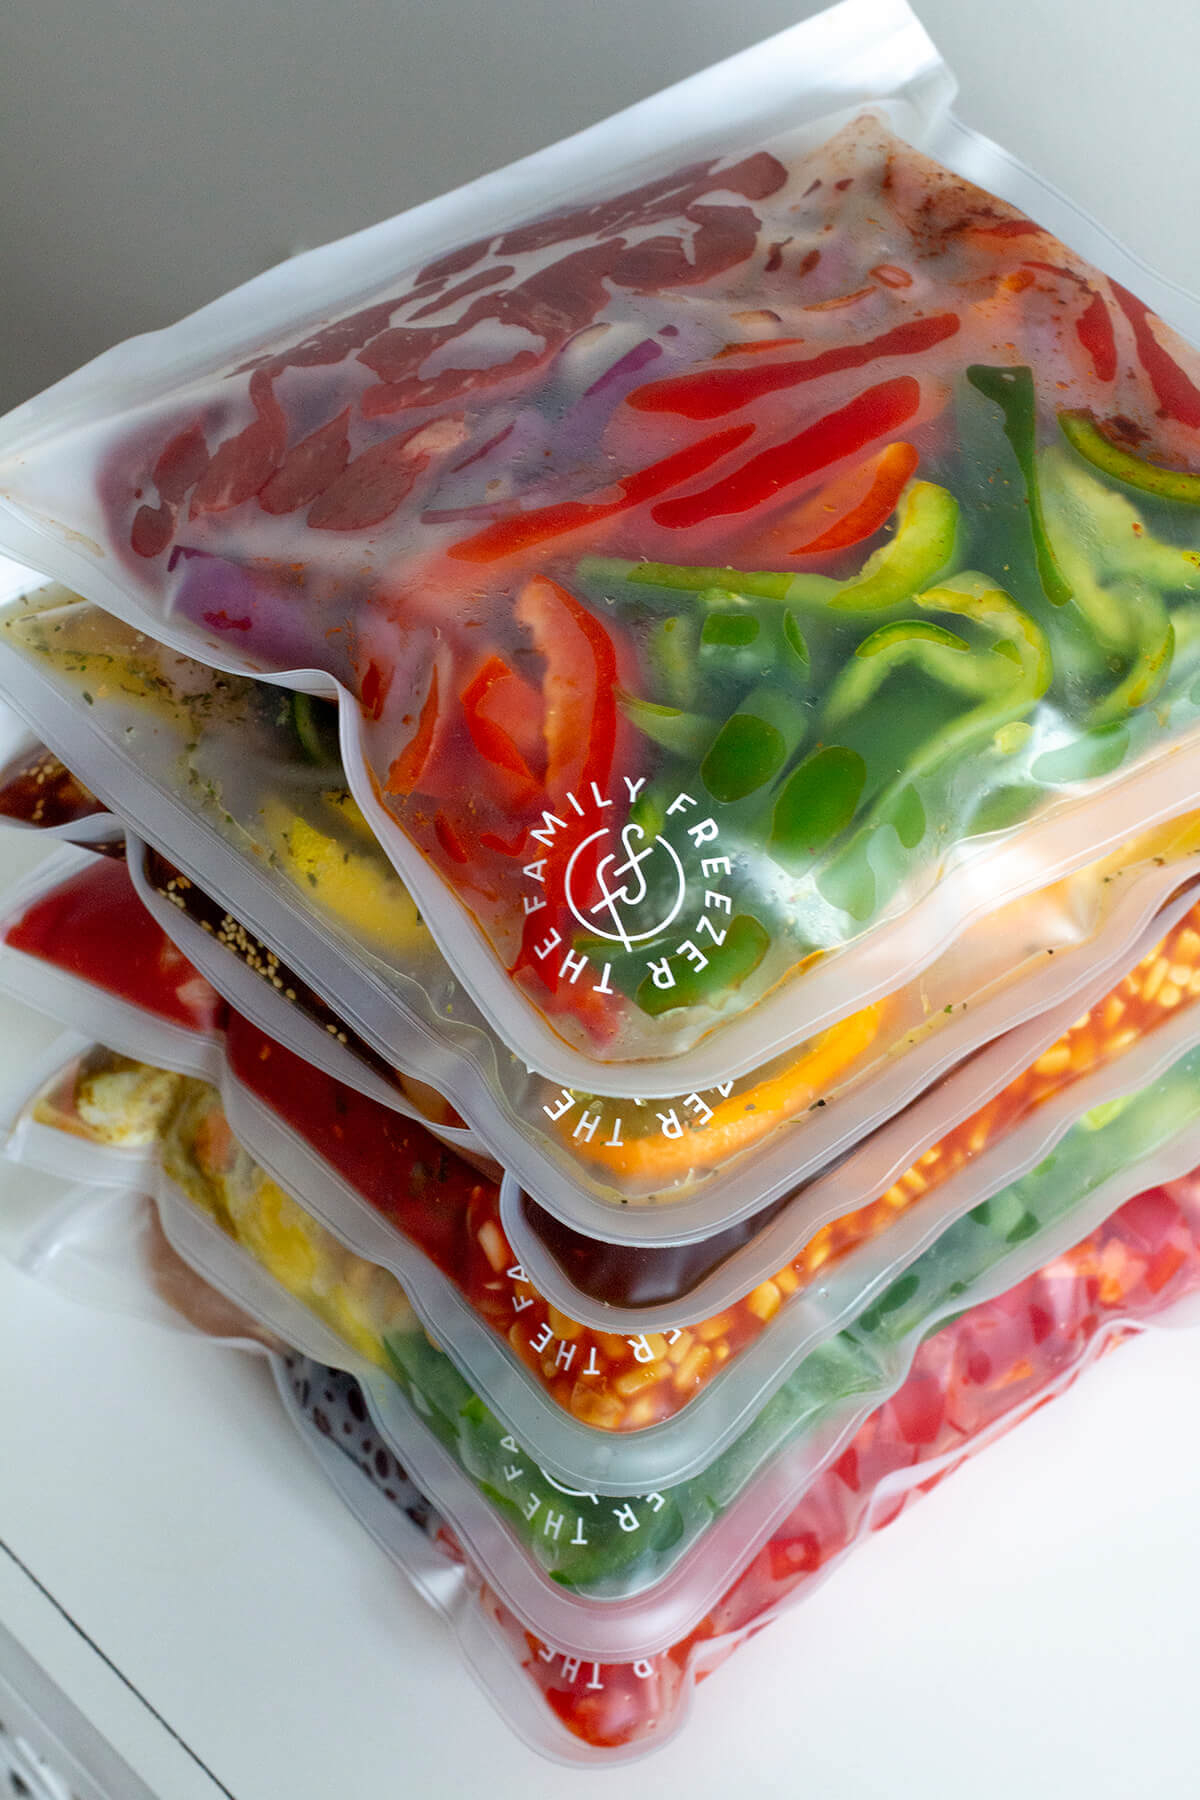 Gelamice Reusable Gallon Freezer Bags - 6 Pack 1 Gallon Storage Bags,  Leakproof Silicone and Plastic Free Gallon Ziplock Bags for